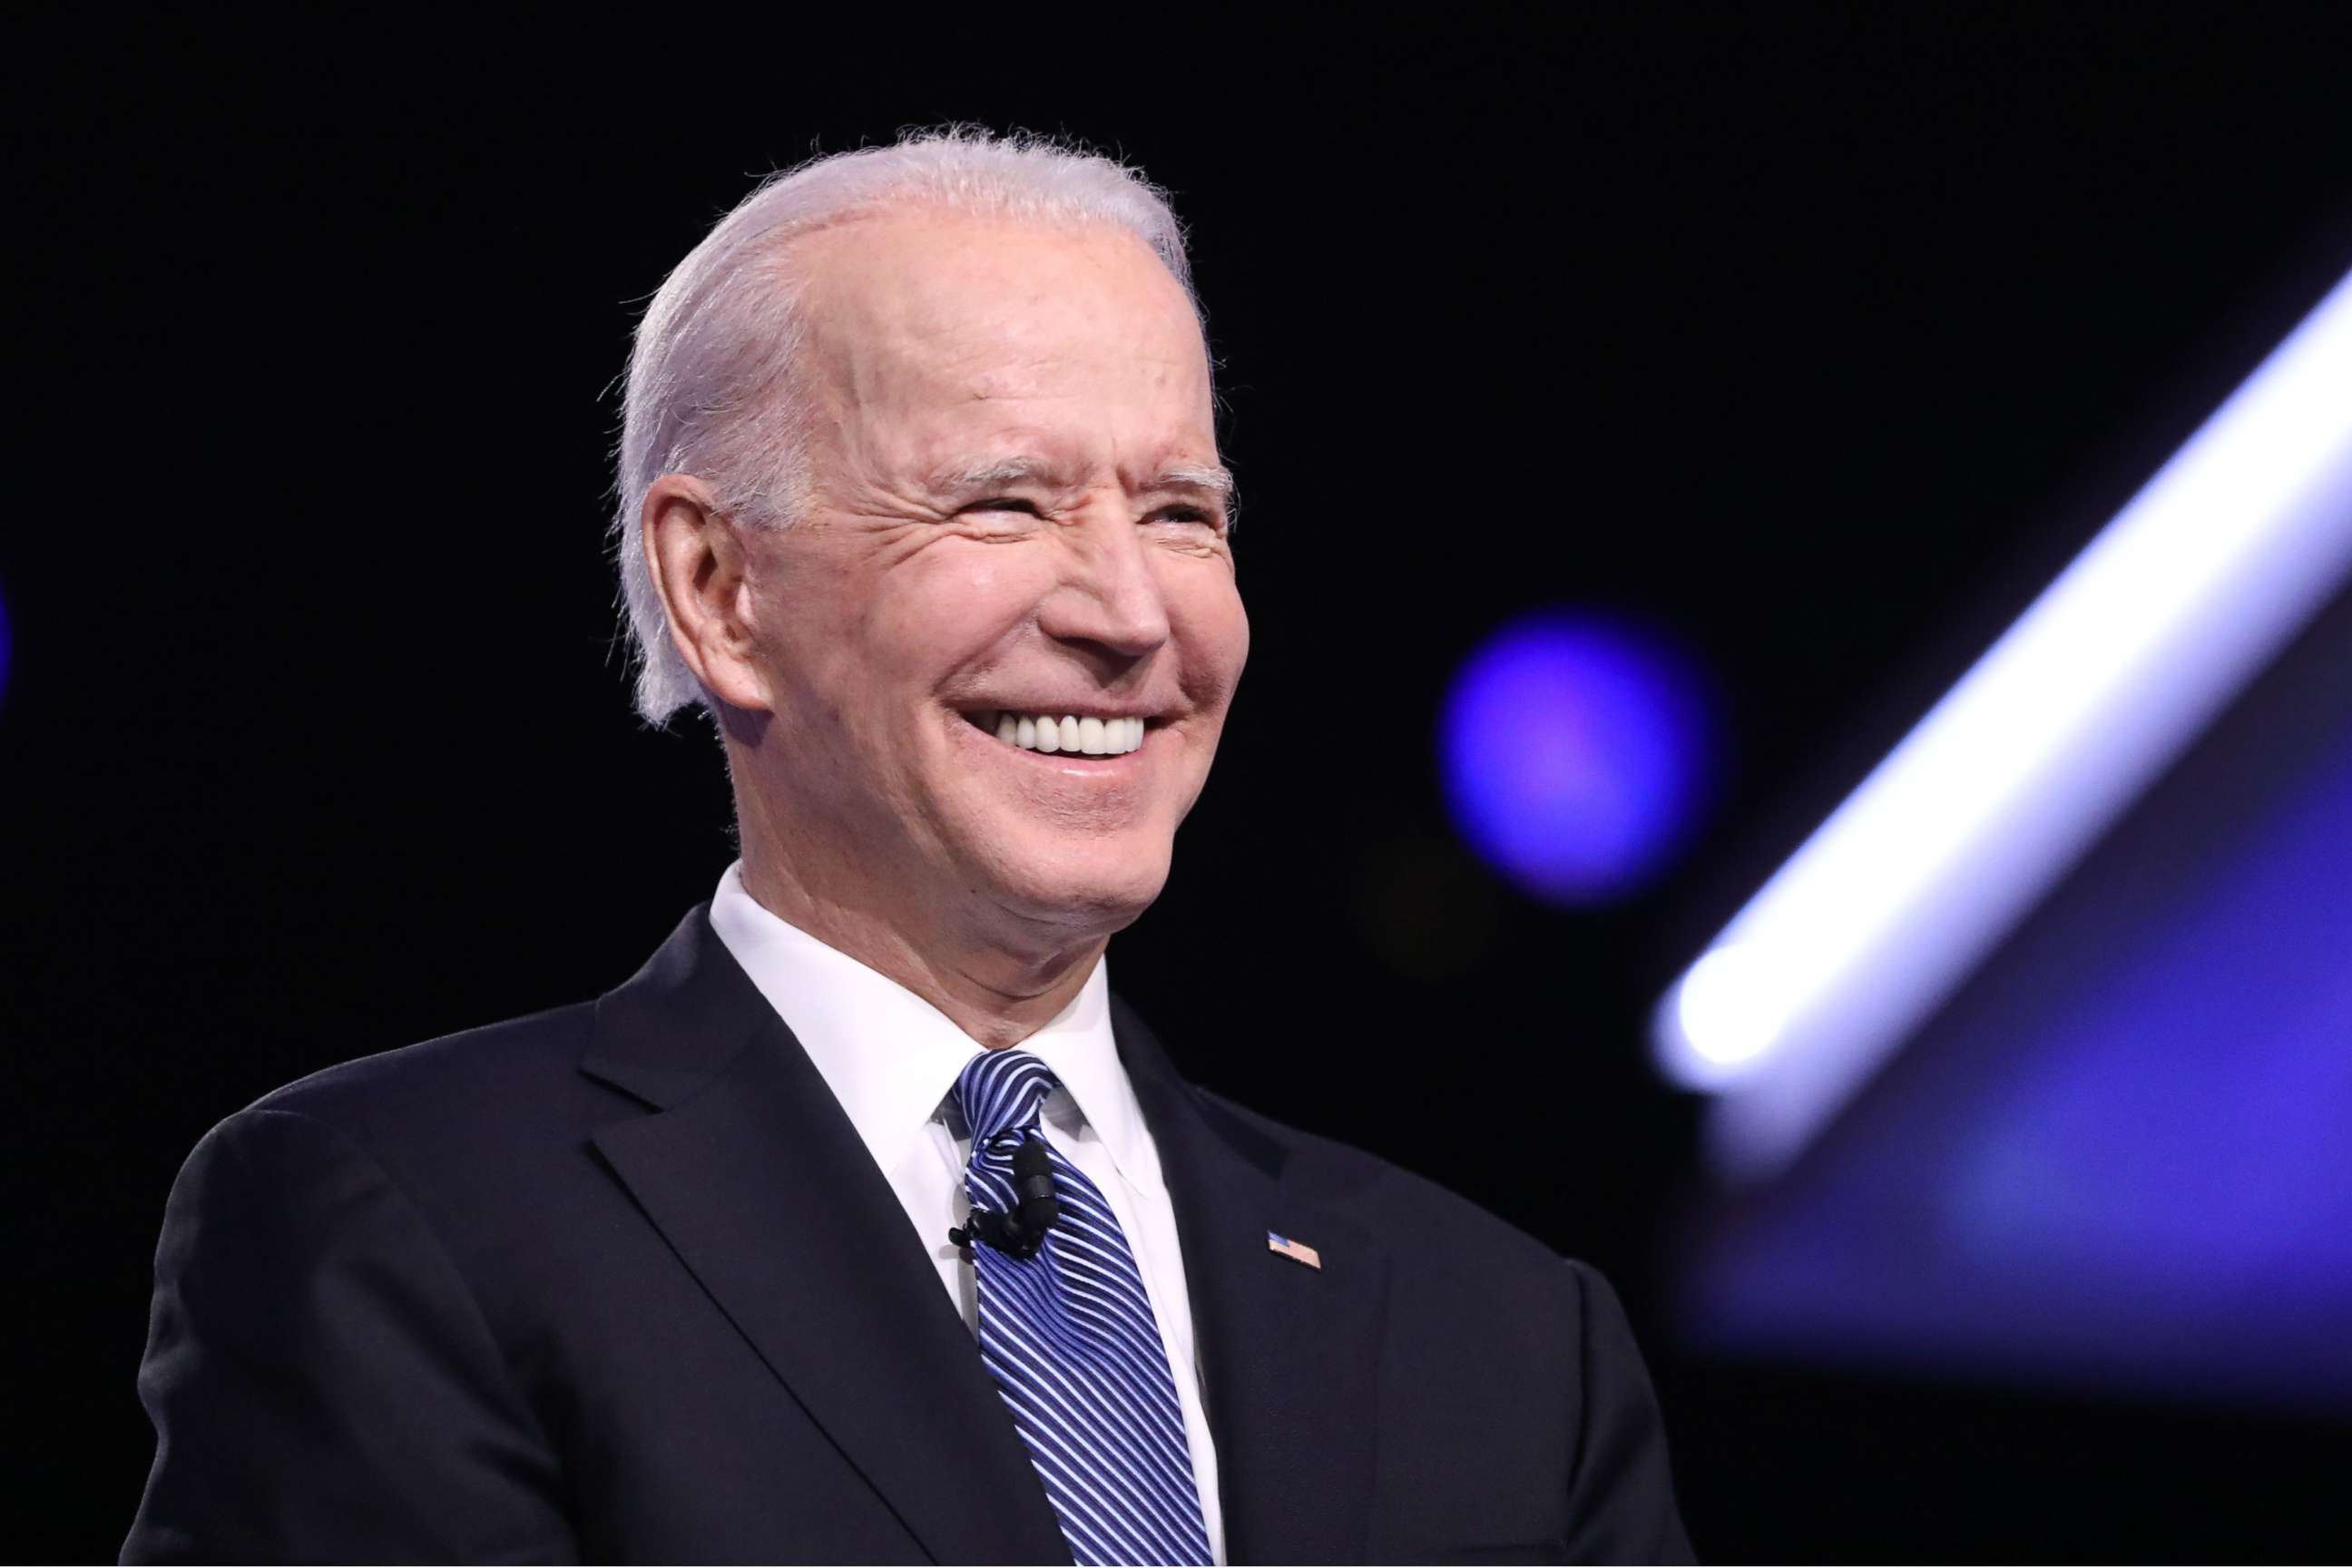 PHOTO: (FILES) In this file photo taken on February 25, 2020 Democratic presidential hopeful former Vice President Joe Biden arrives to participate in the tenth Democratic primary debate of the 2020 presidential campaign.